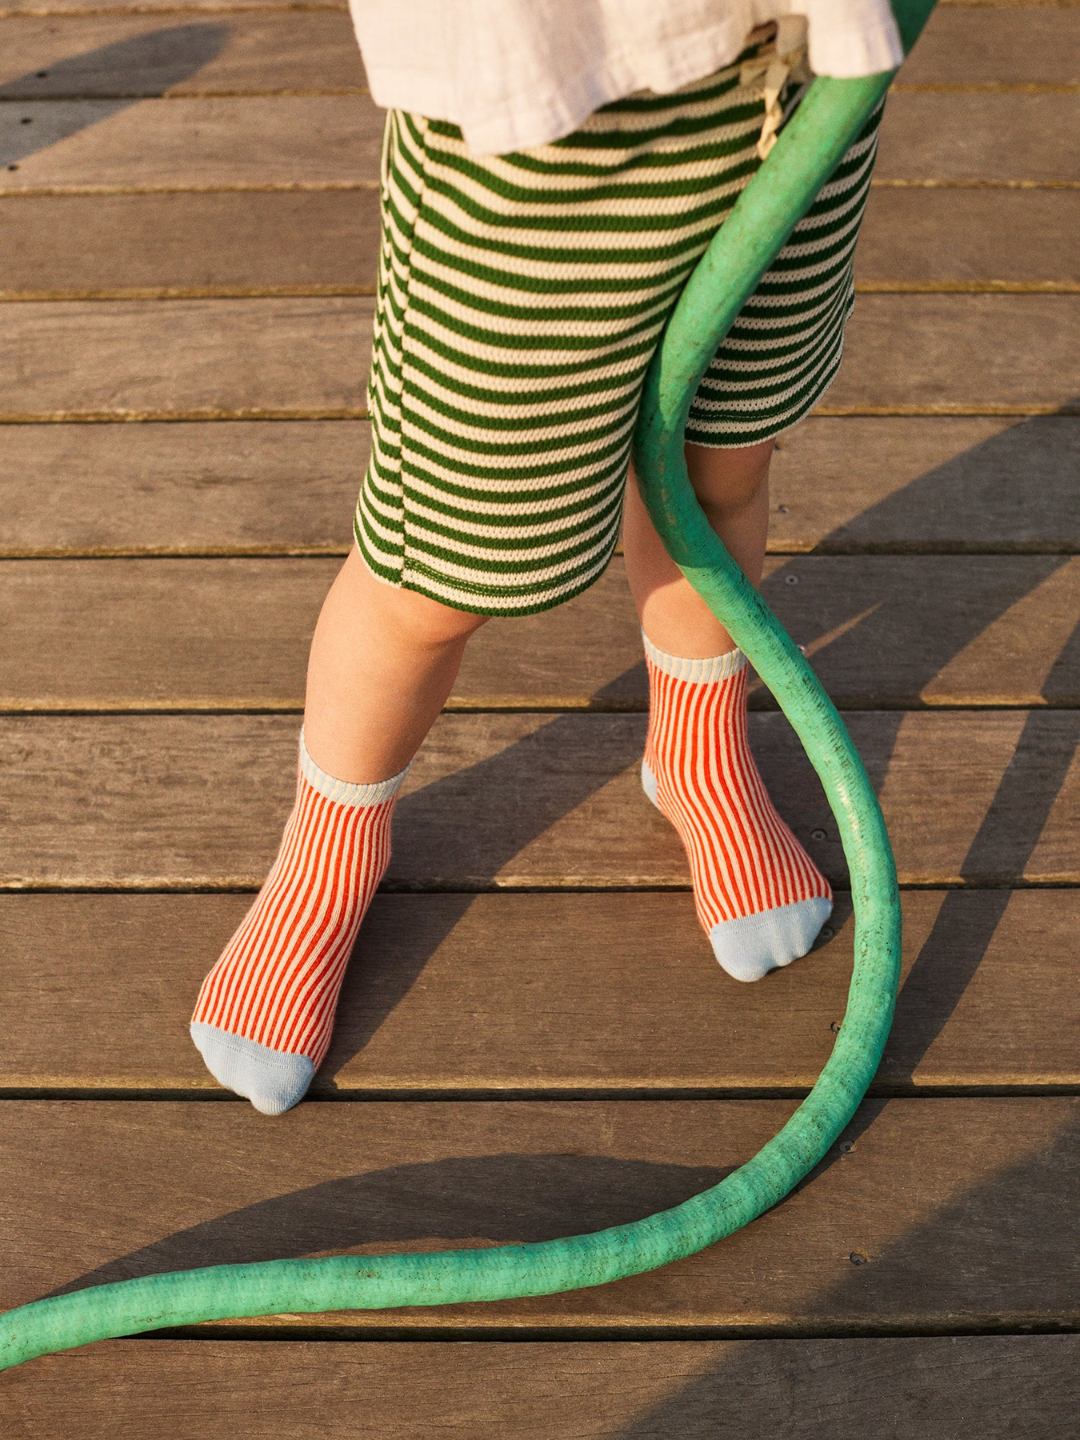 Persimmon | Kid wearing socks in narrow red and white vertical stripes with pale blue toe, heel, and green stripes at ankle cuff. Image is cropped below the waist showing a child wearing the socks, standing on a wooden deck, holding a green hose, and wearing green and cream striped shorts.